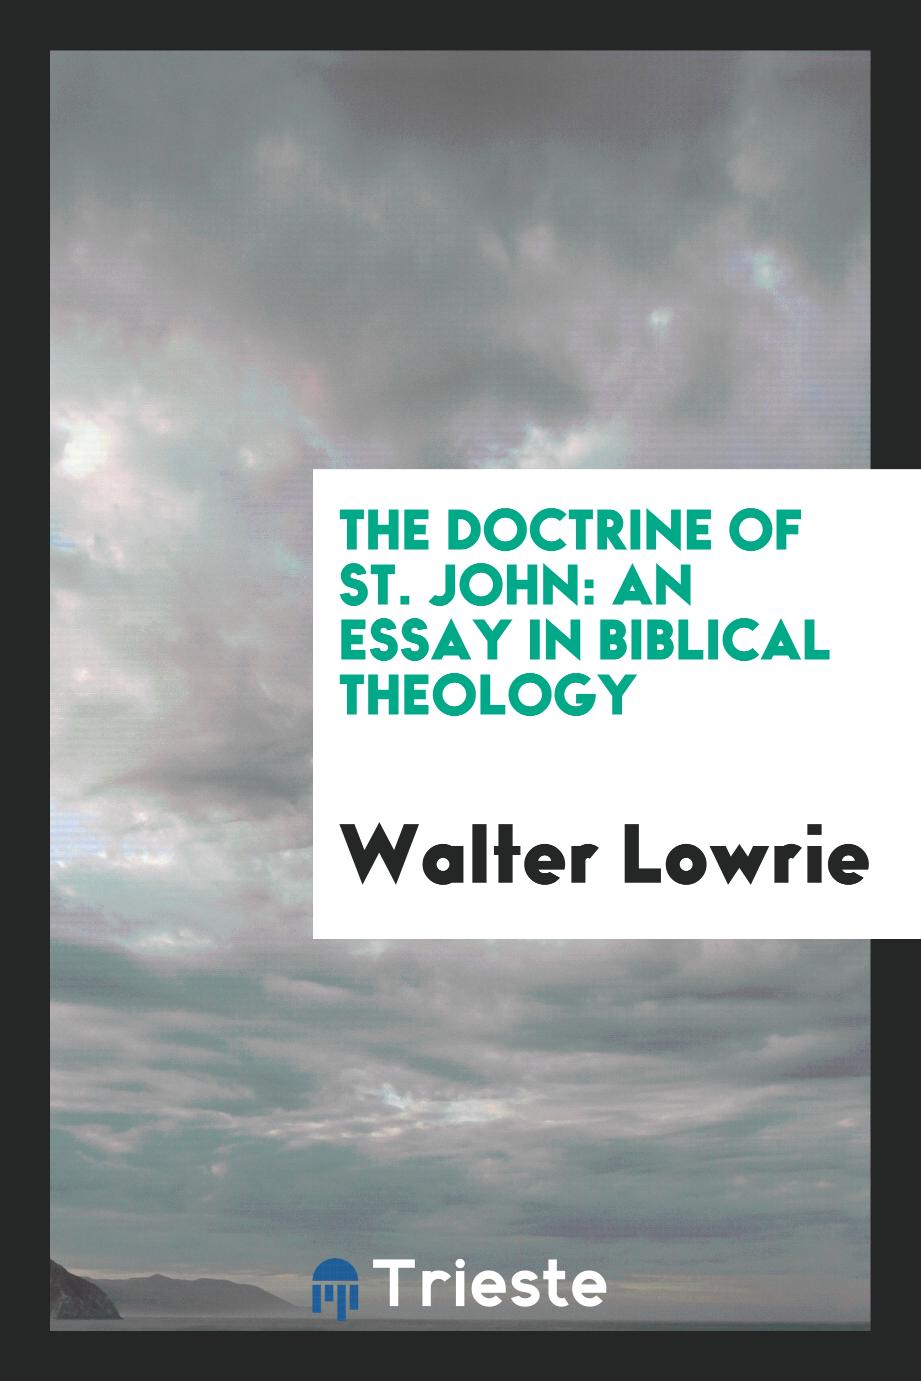 The doctrine of St. John: an essay in Biblical theology